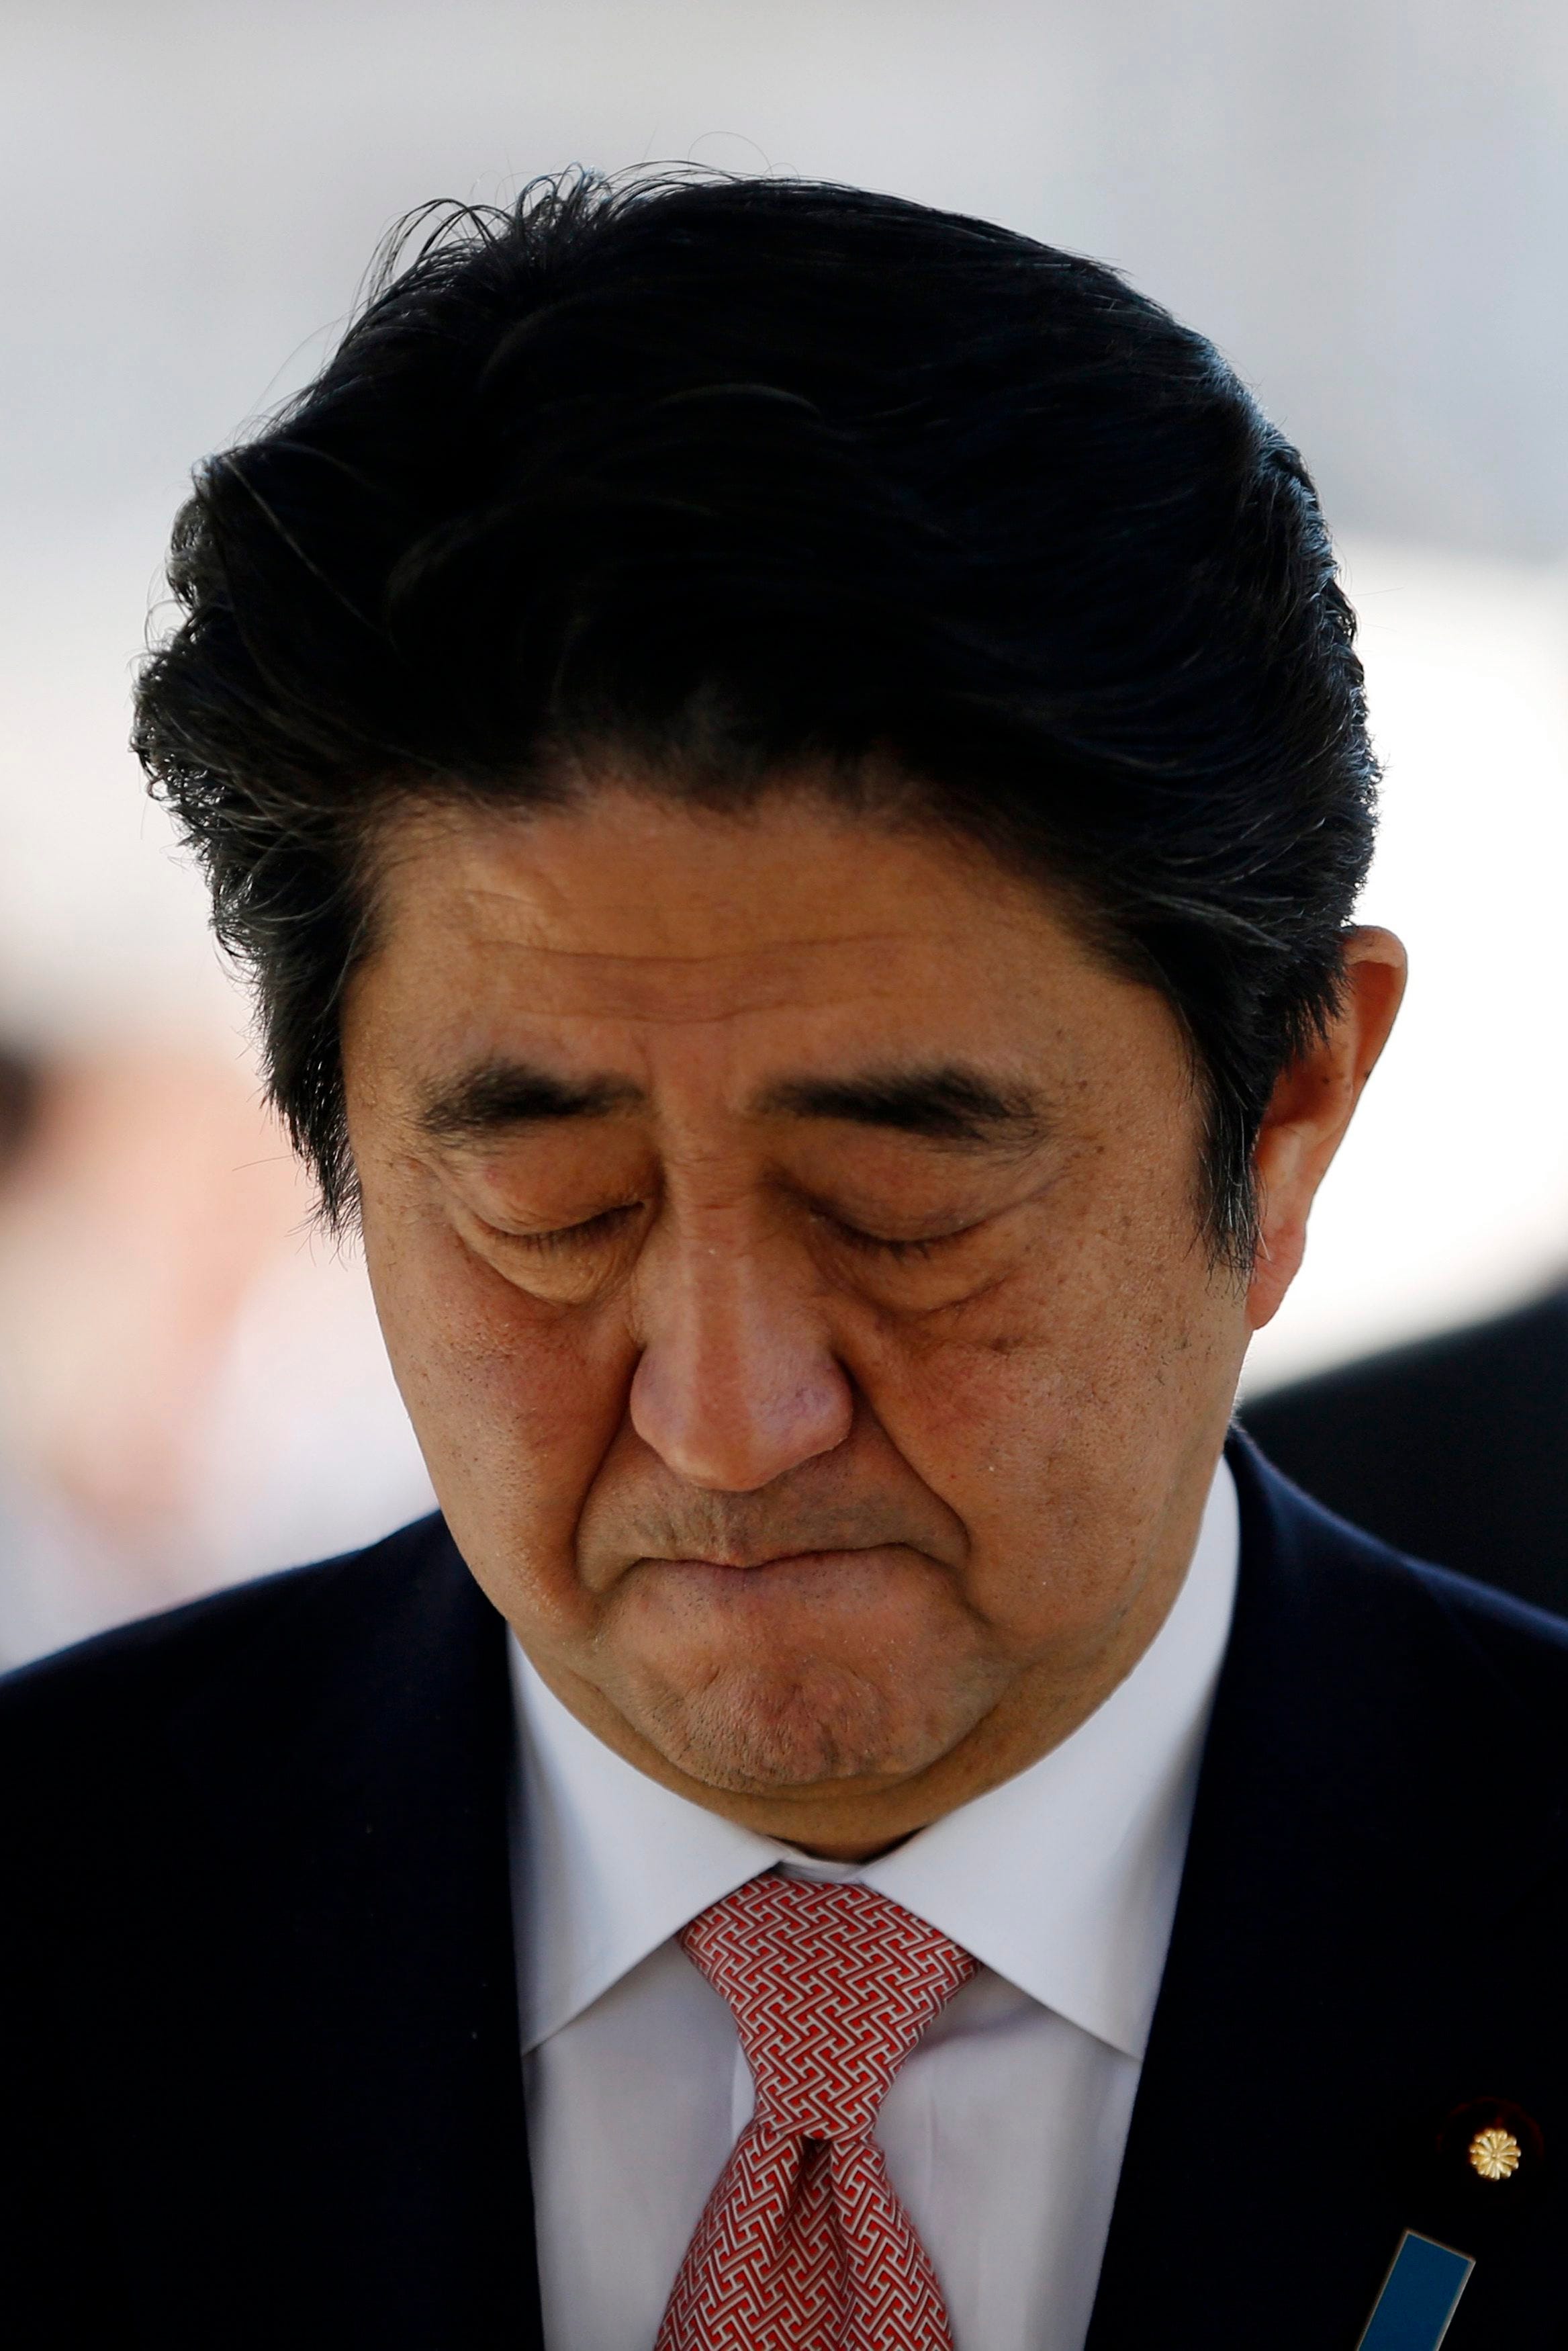 Islamic State threatens to kill Japanese hostages